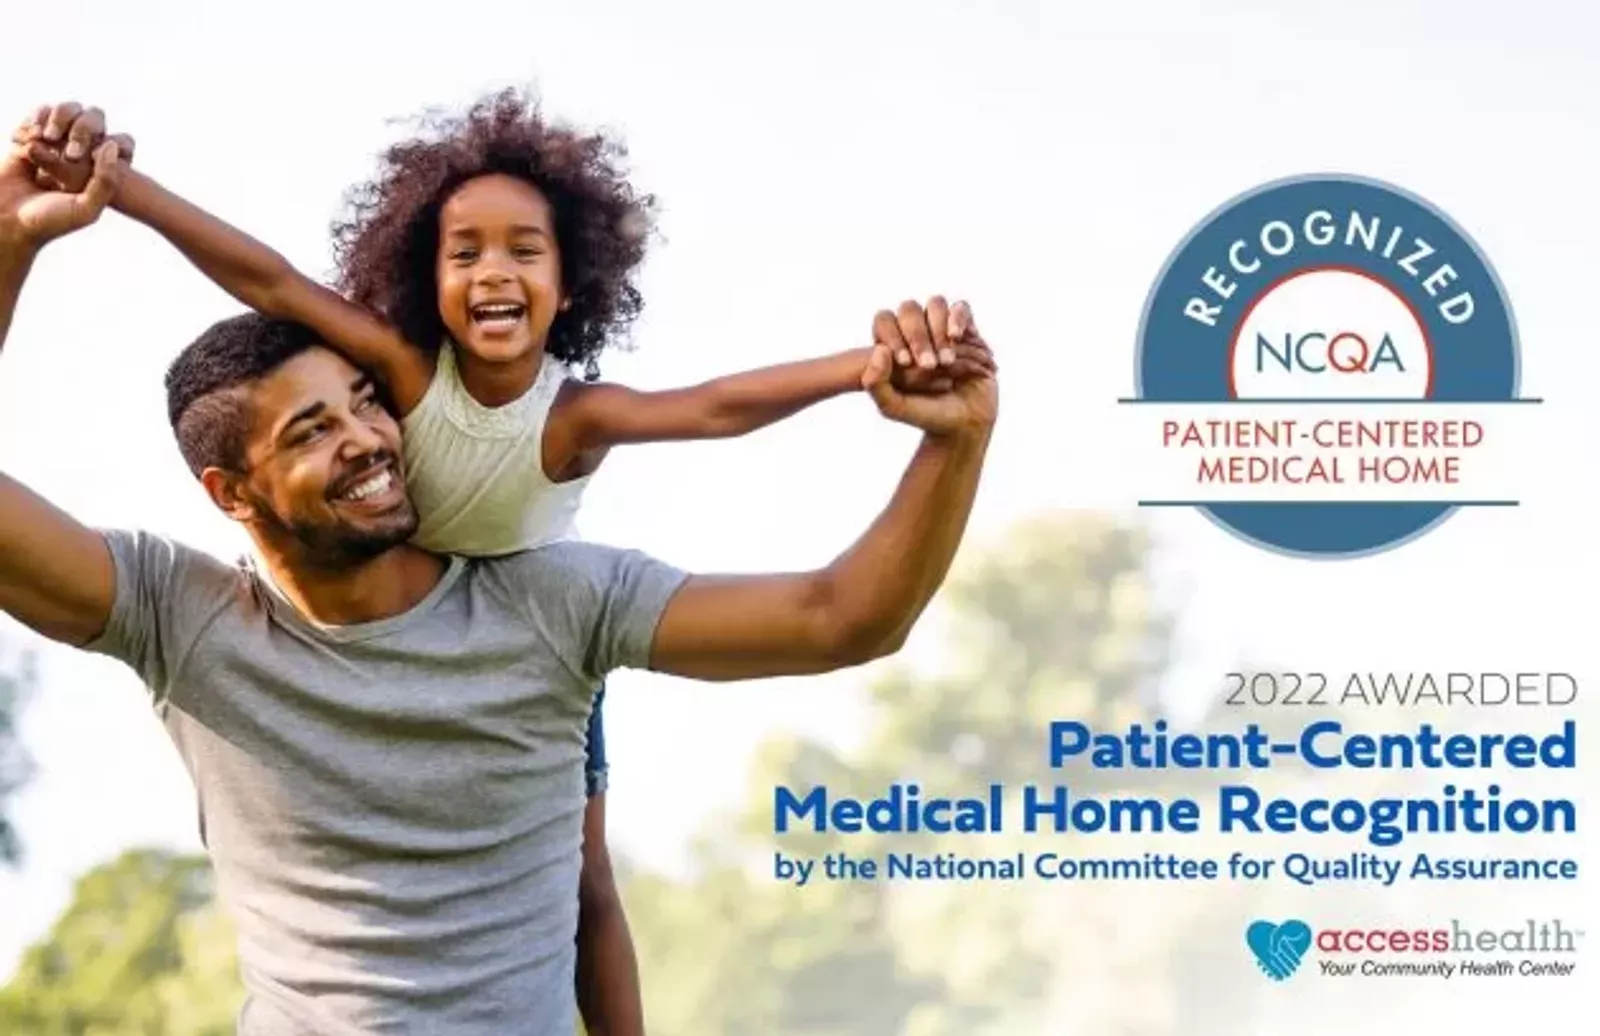 AccessHealth Awarded Patient-Centered Medical Home Recognition By The National Committee For Quality Assurance